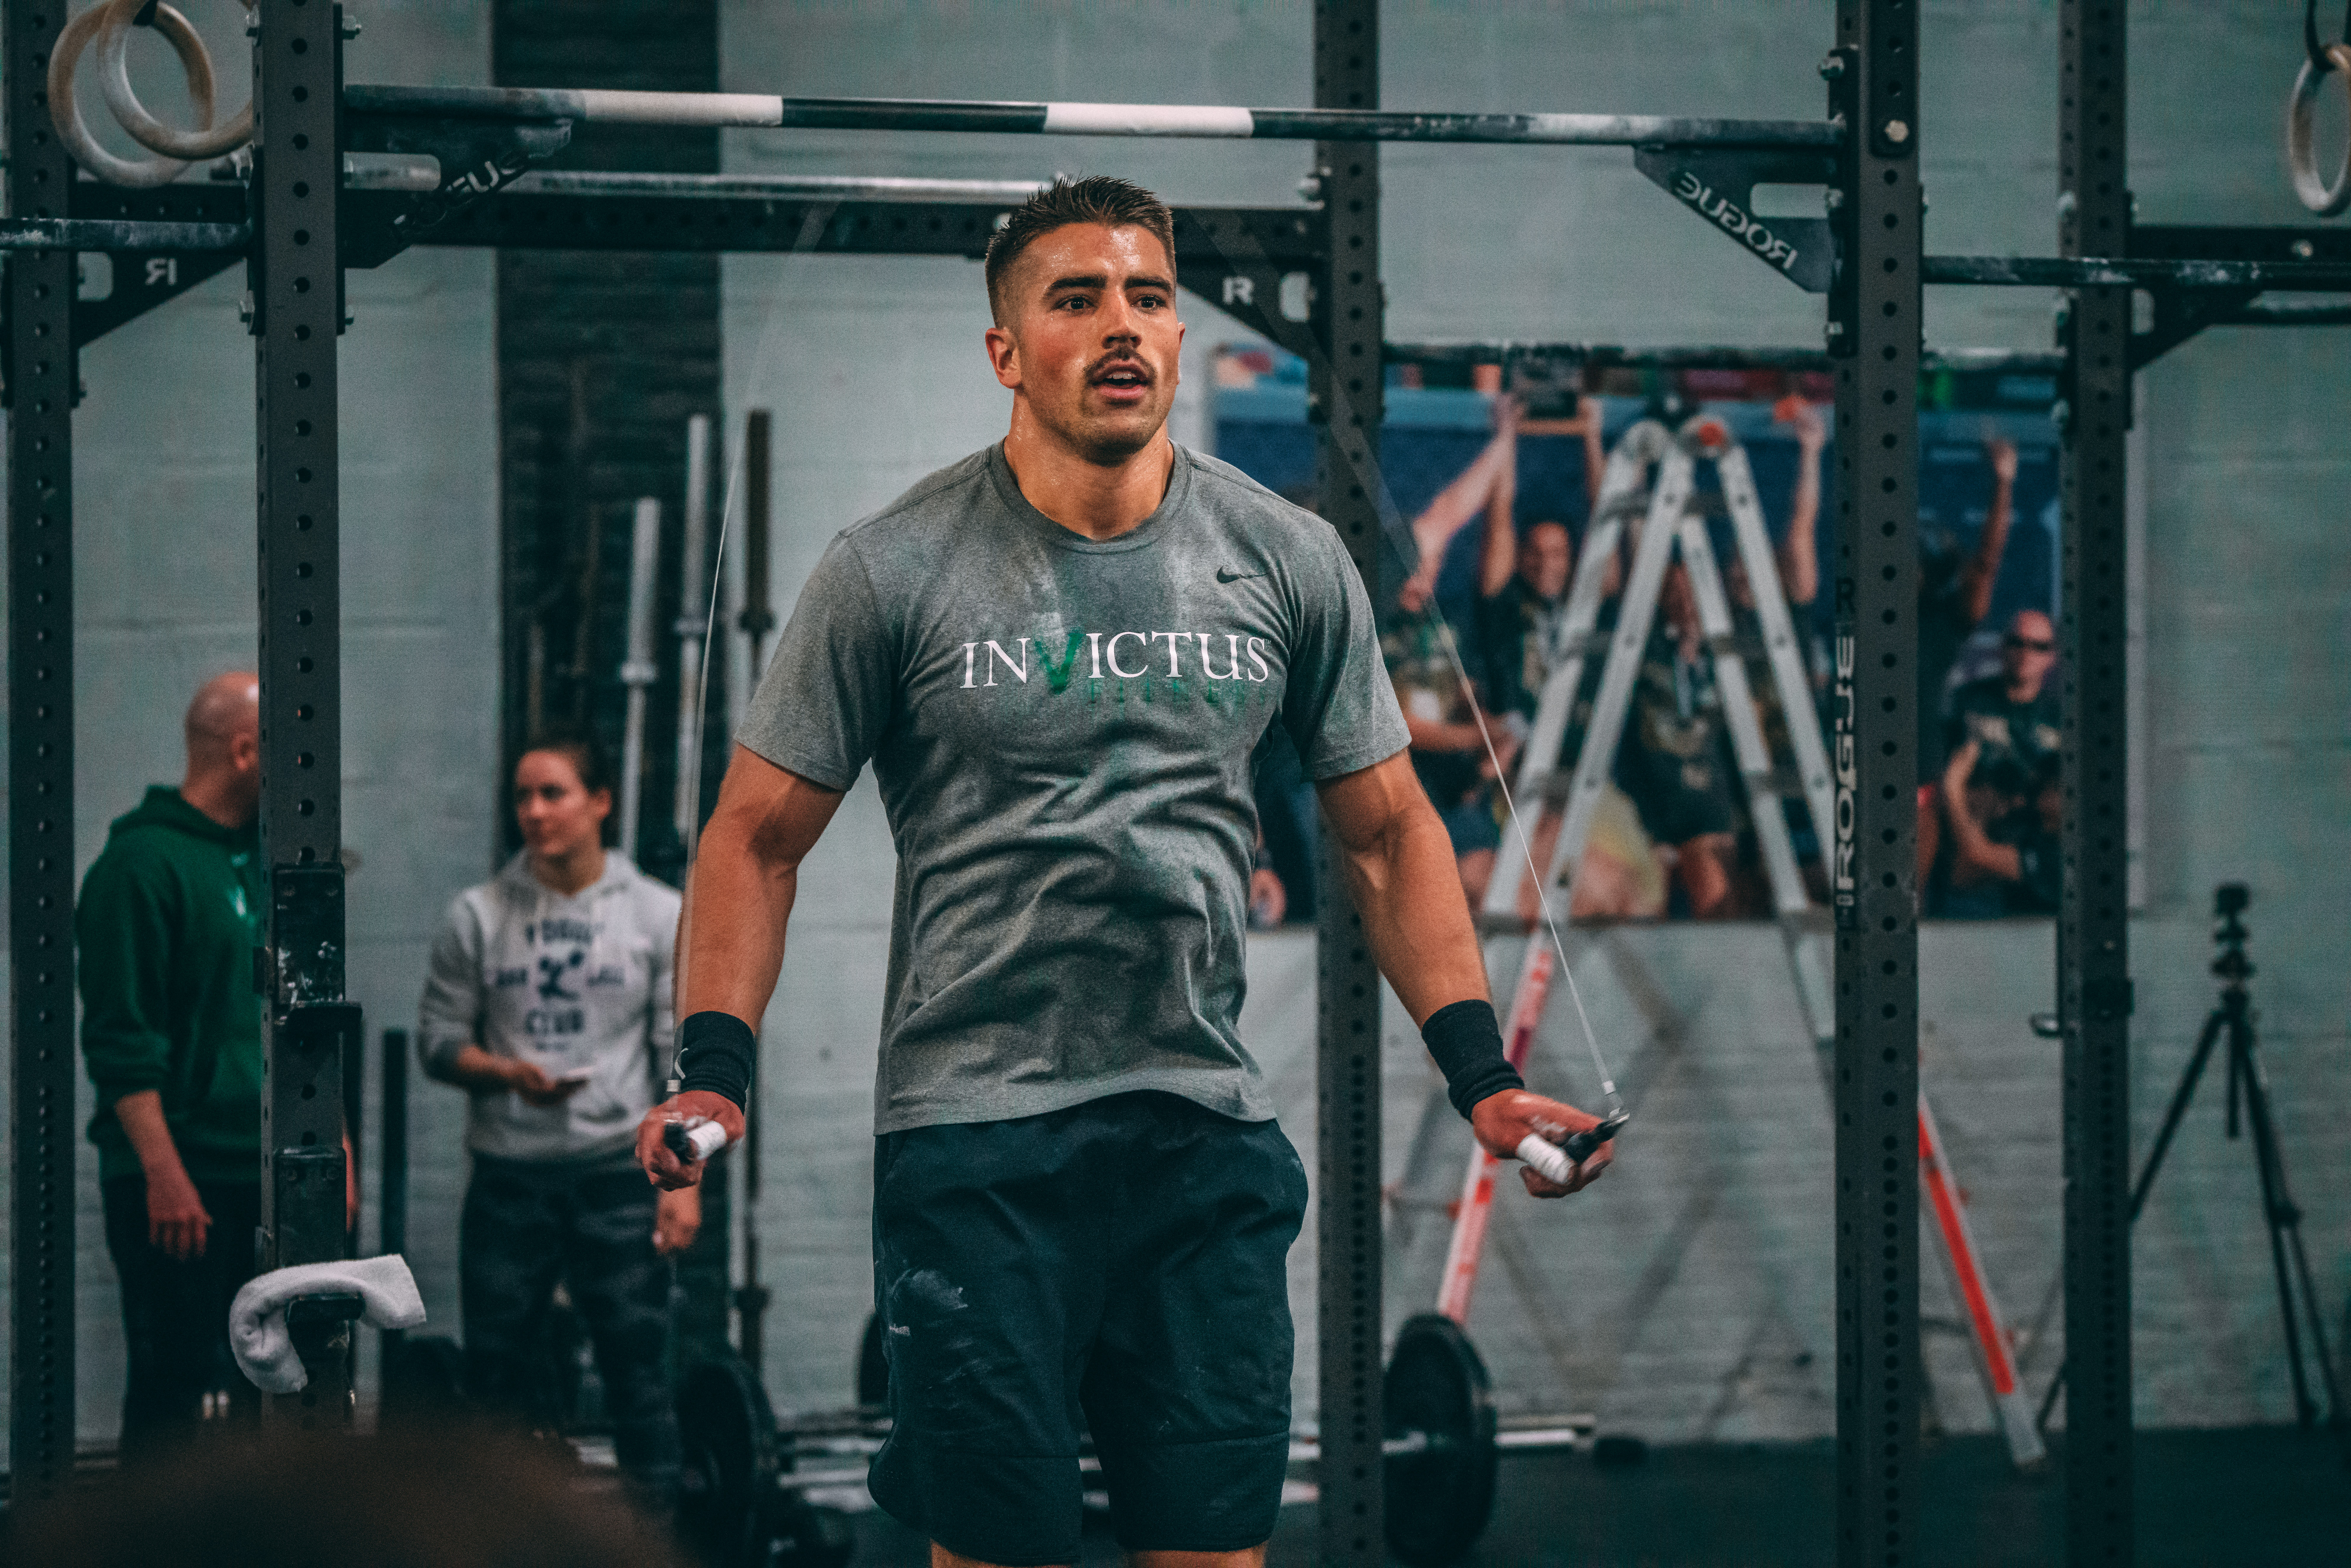 The Ultimate Guide To Box Jumps For CrossFit! - WODprep